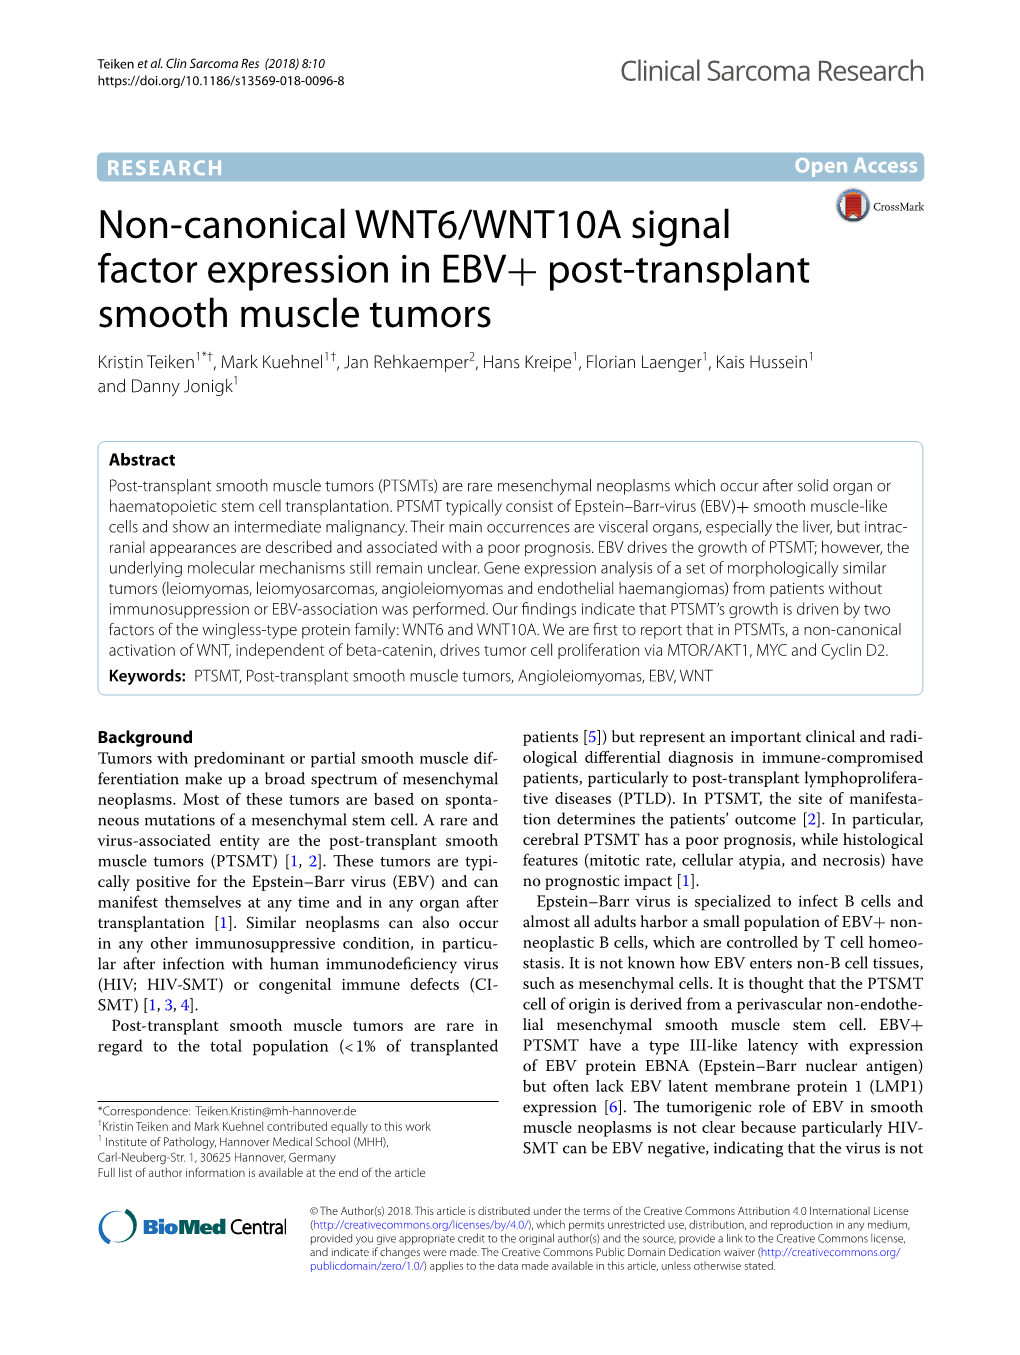 Non-Canonical WNT6/WNT10A Signal Factor Expression in EBV+ Post